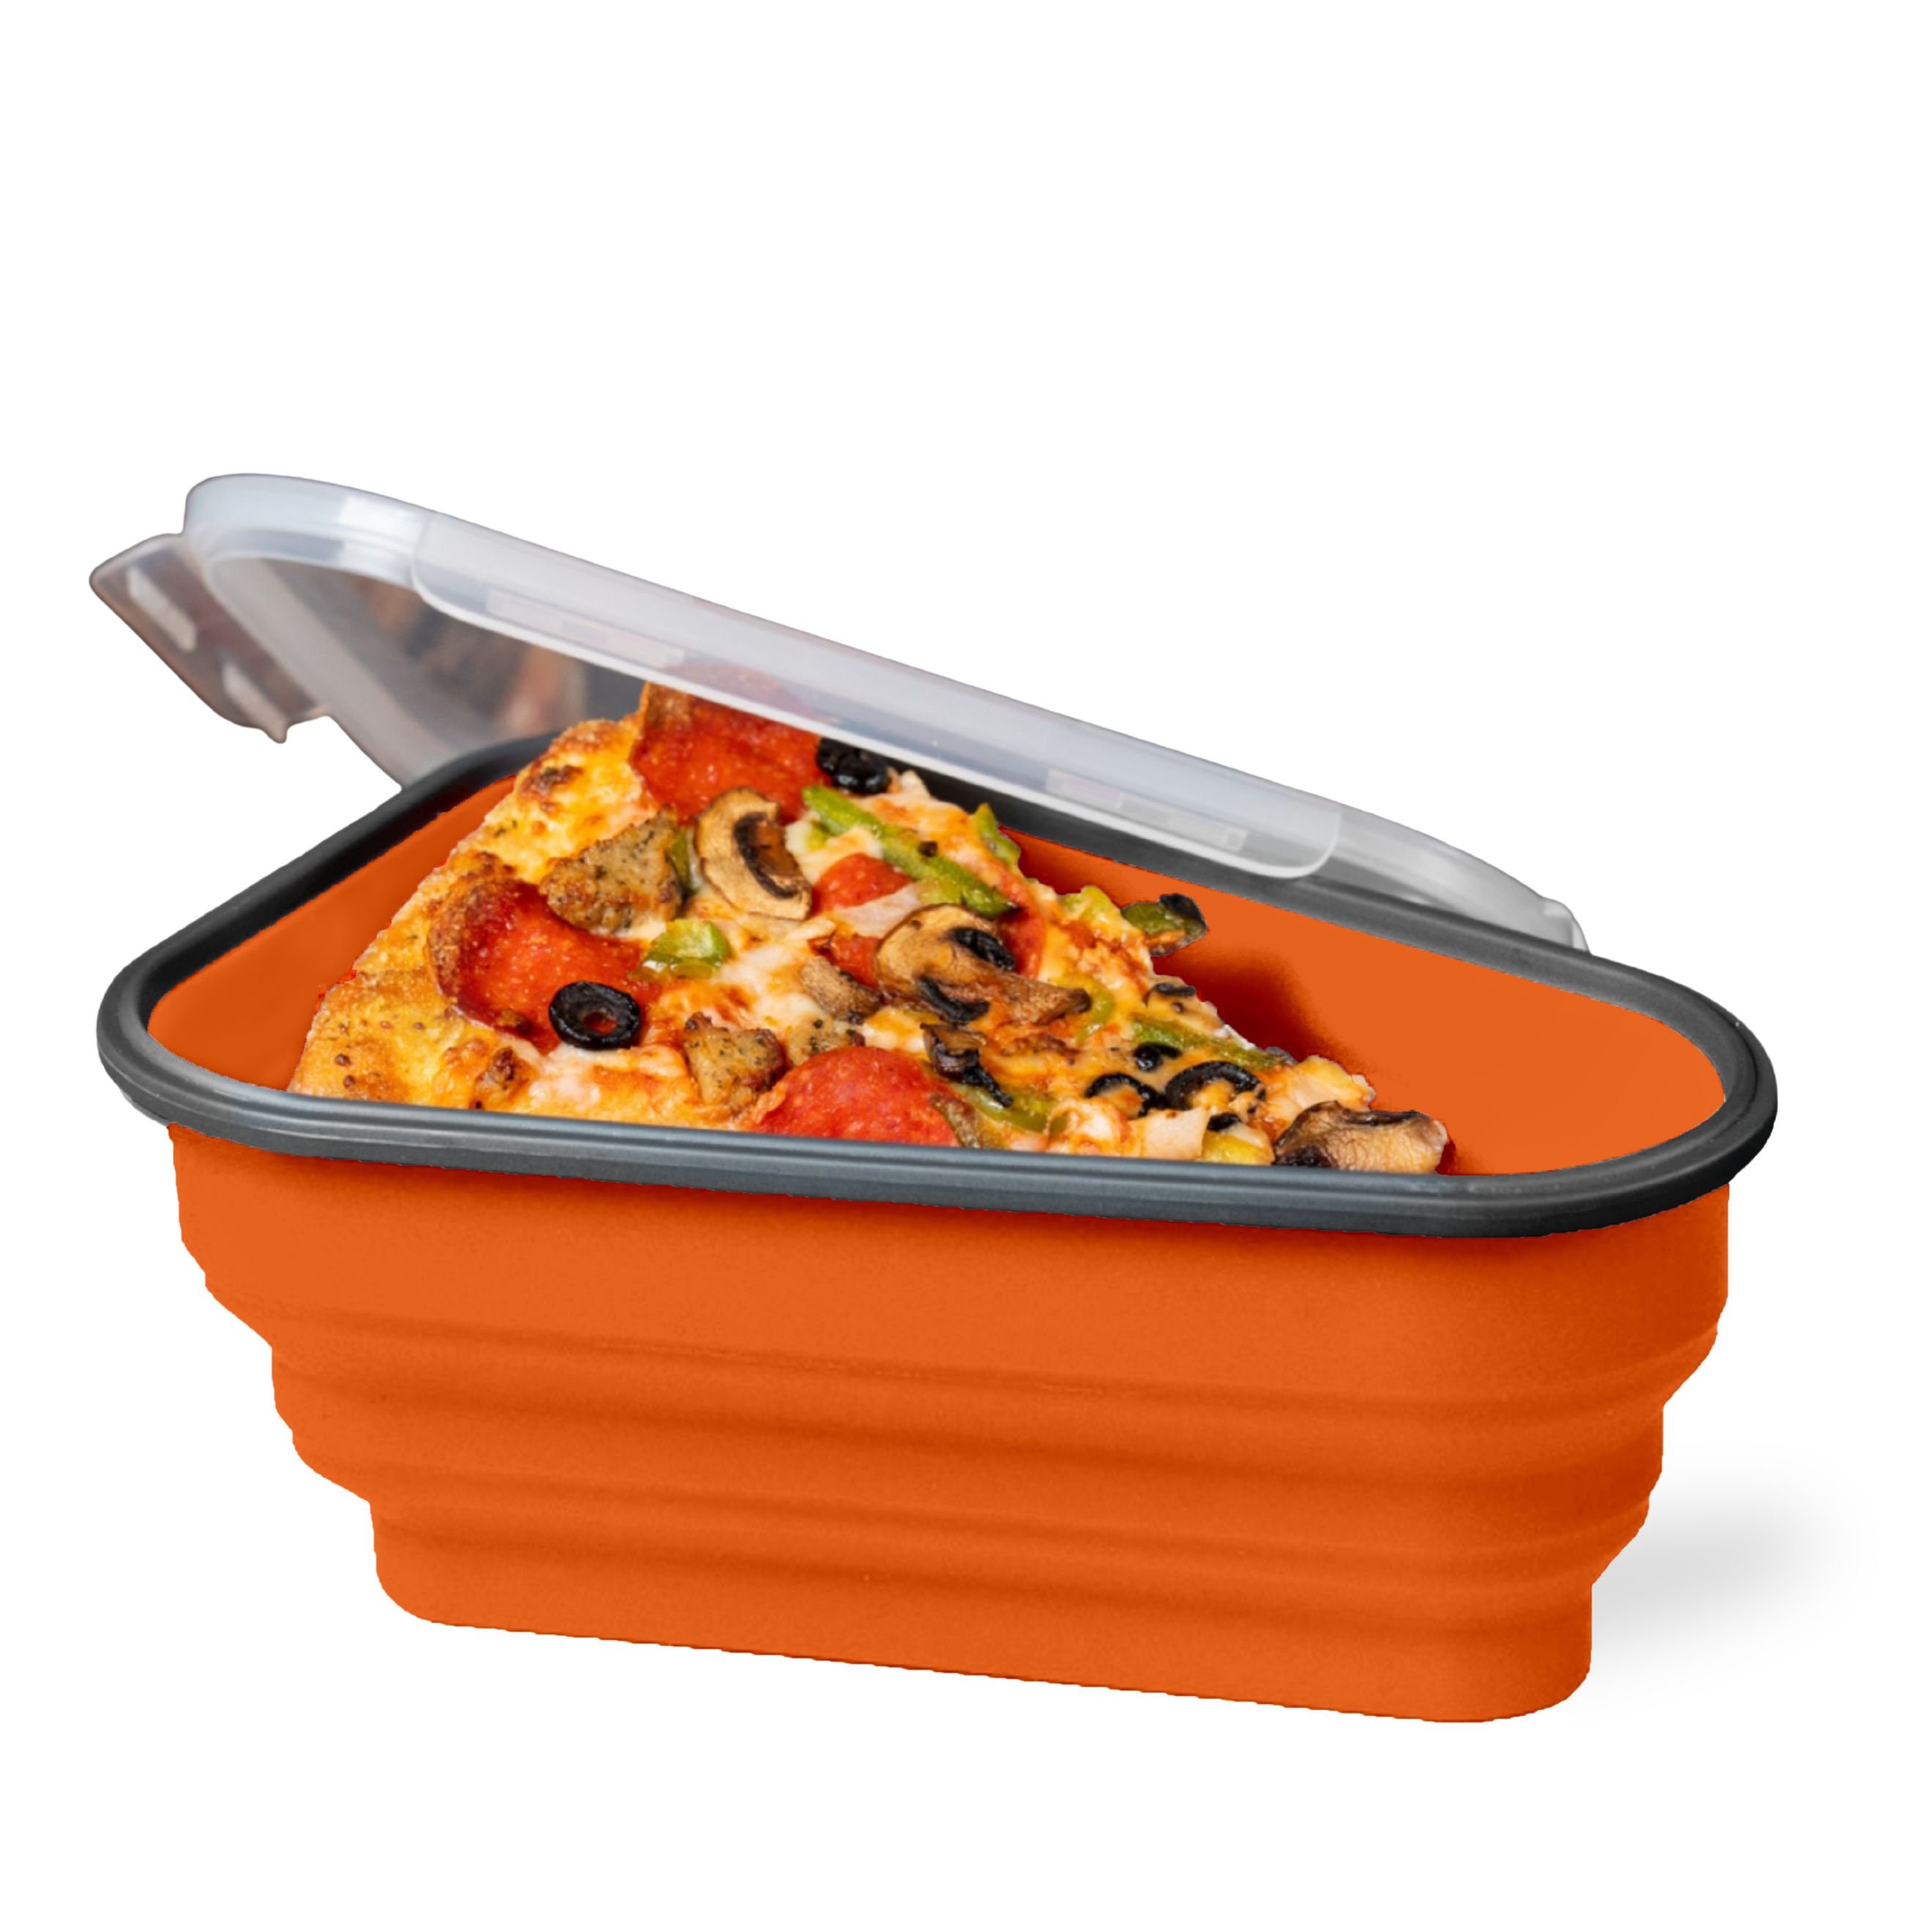 1pc Pizza Storage Container, Collapsible Pizza Slice Container